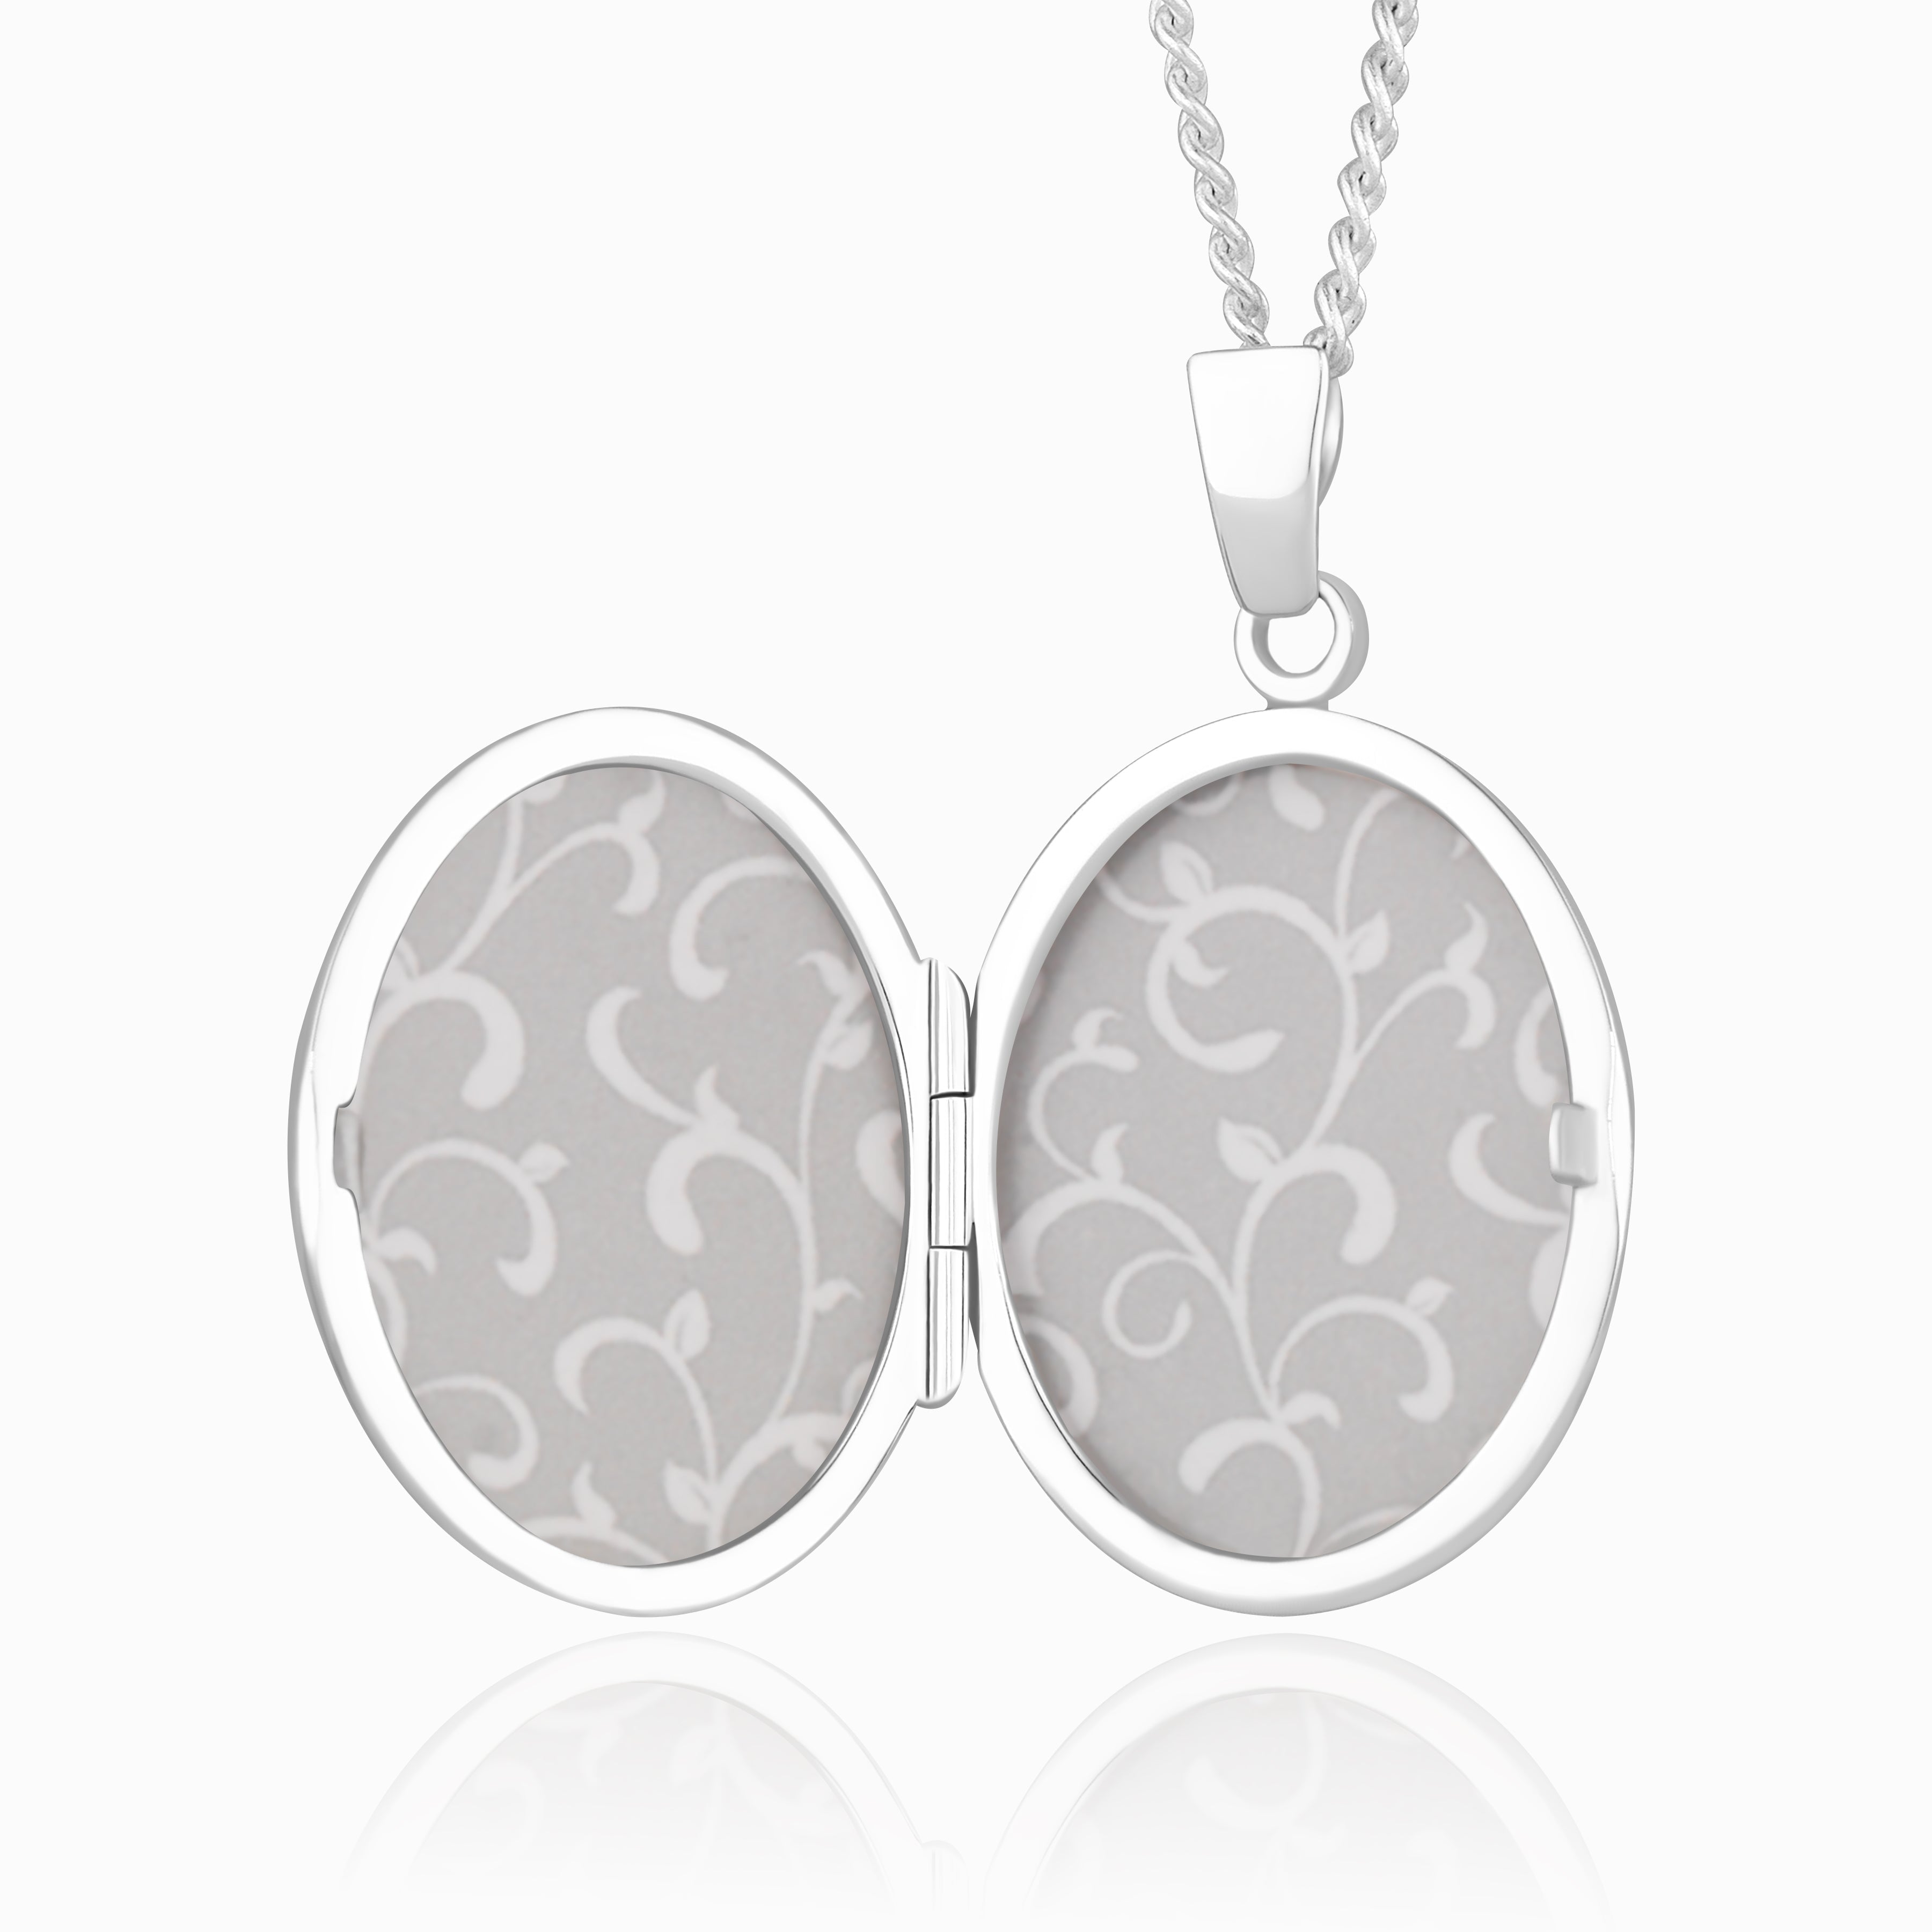 Product title: Hand Polished Silver Oval, product type: Locket